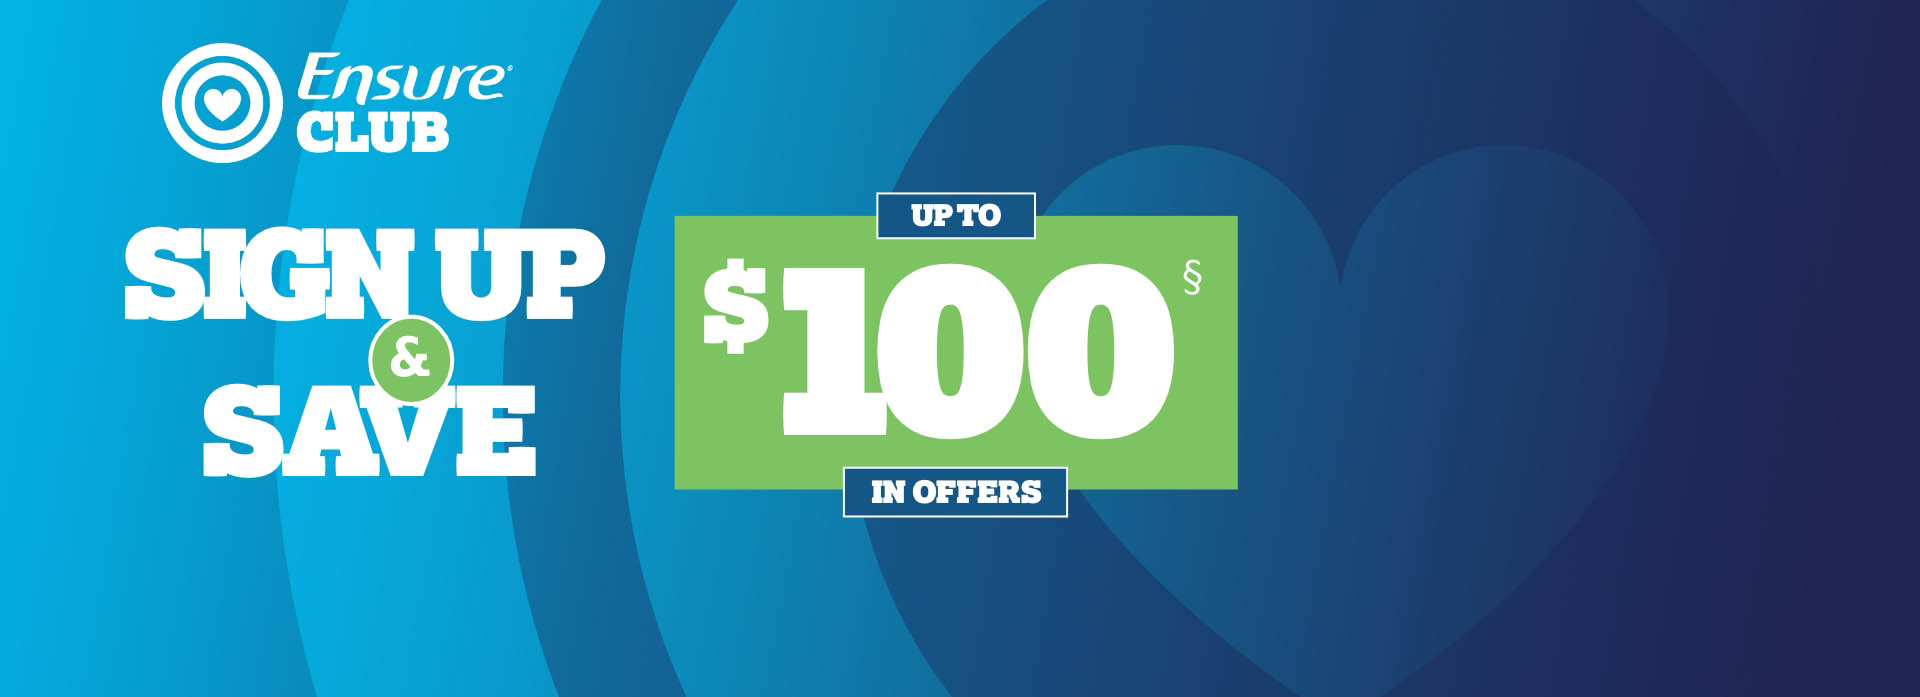 ”Join the Ensure Club and receive up to $100 in offers”